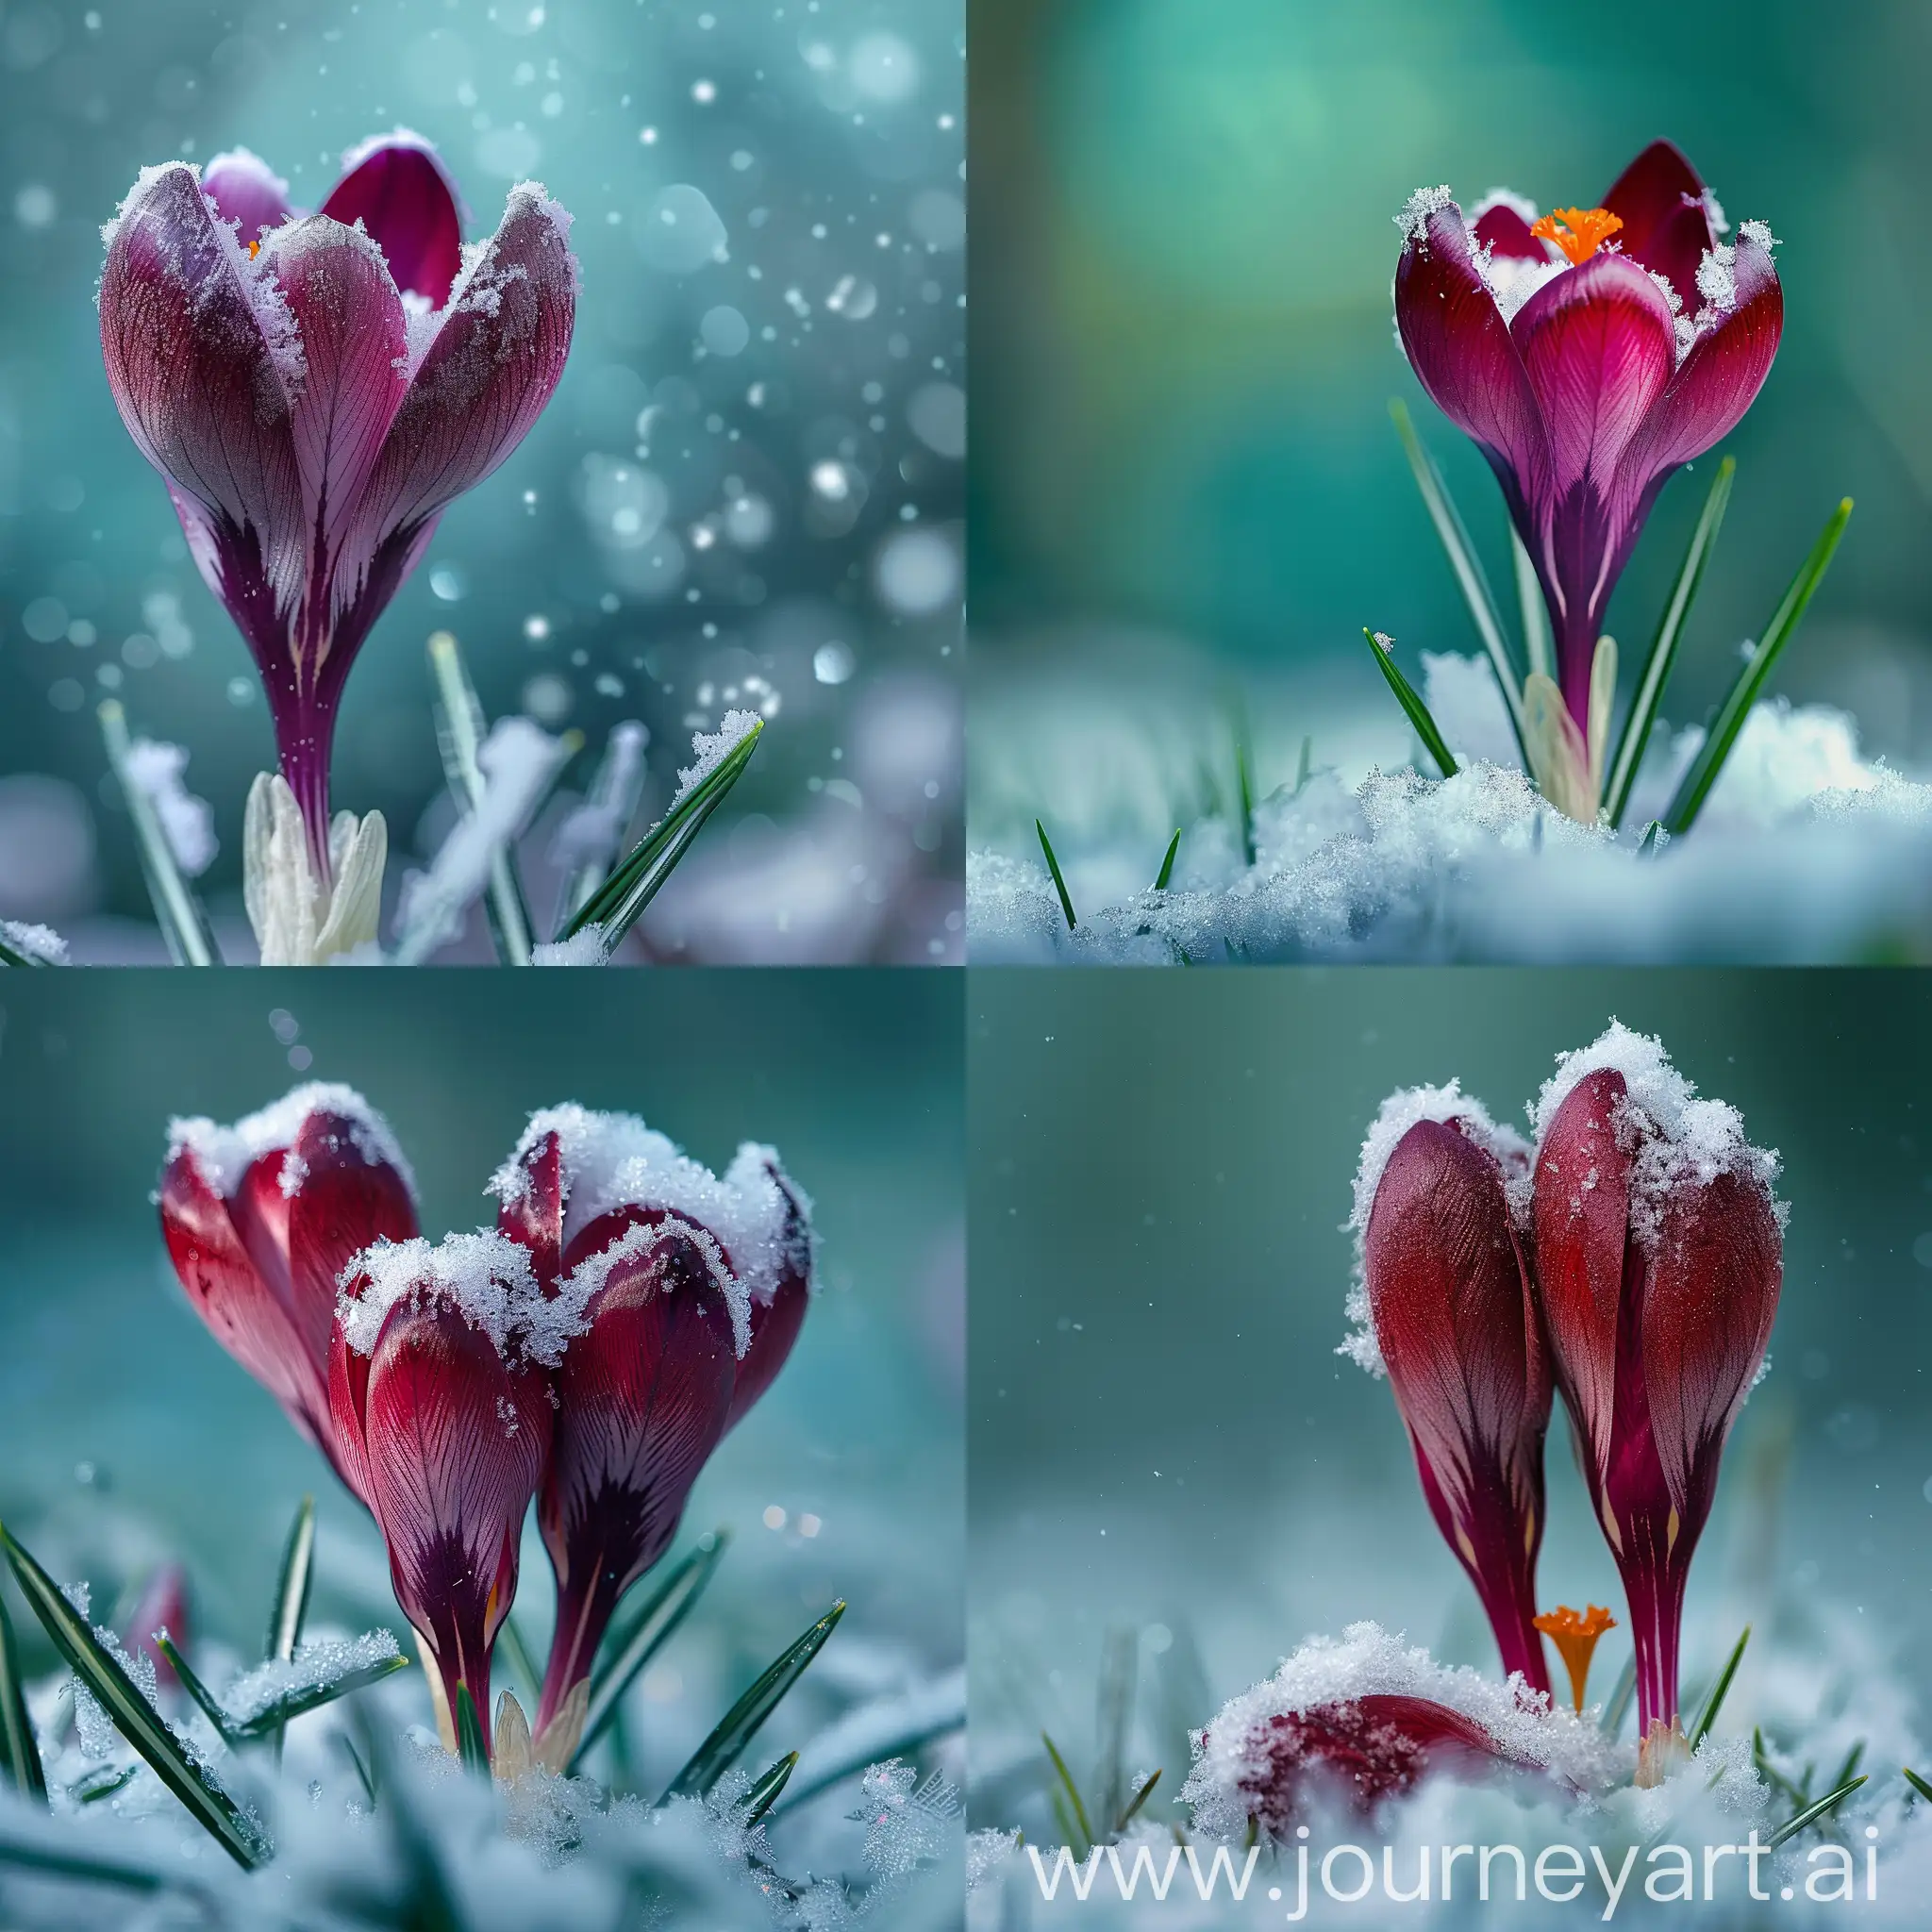 Burgundy-Crocus-Covered-in-Snow-Enchanting-Macro-Photography-in-a-Serene-Forest-Setting